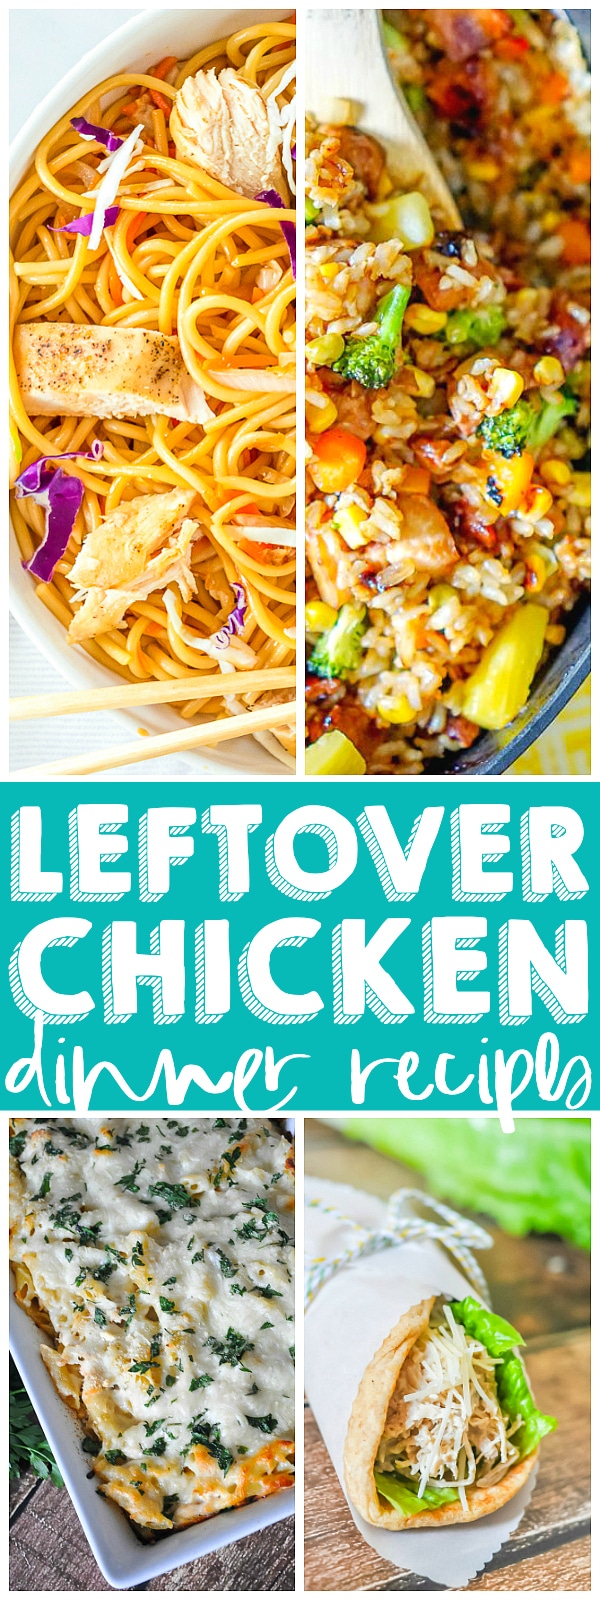 Add these easy leftover chicken recipes to your menu planning! It is easy on your grocery budget by making good use of leftovers or by cooking inexpensive chicken to use! Most are ready in less than 30 minutes, making them perfect for easy weeknight dinners! | The Love Nerds #chickendinner #easyfamilydinners #30minutedinners